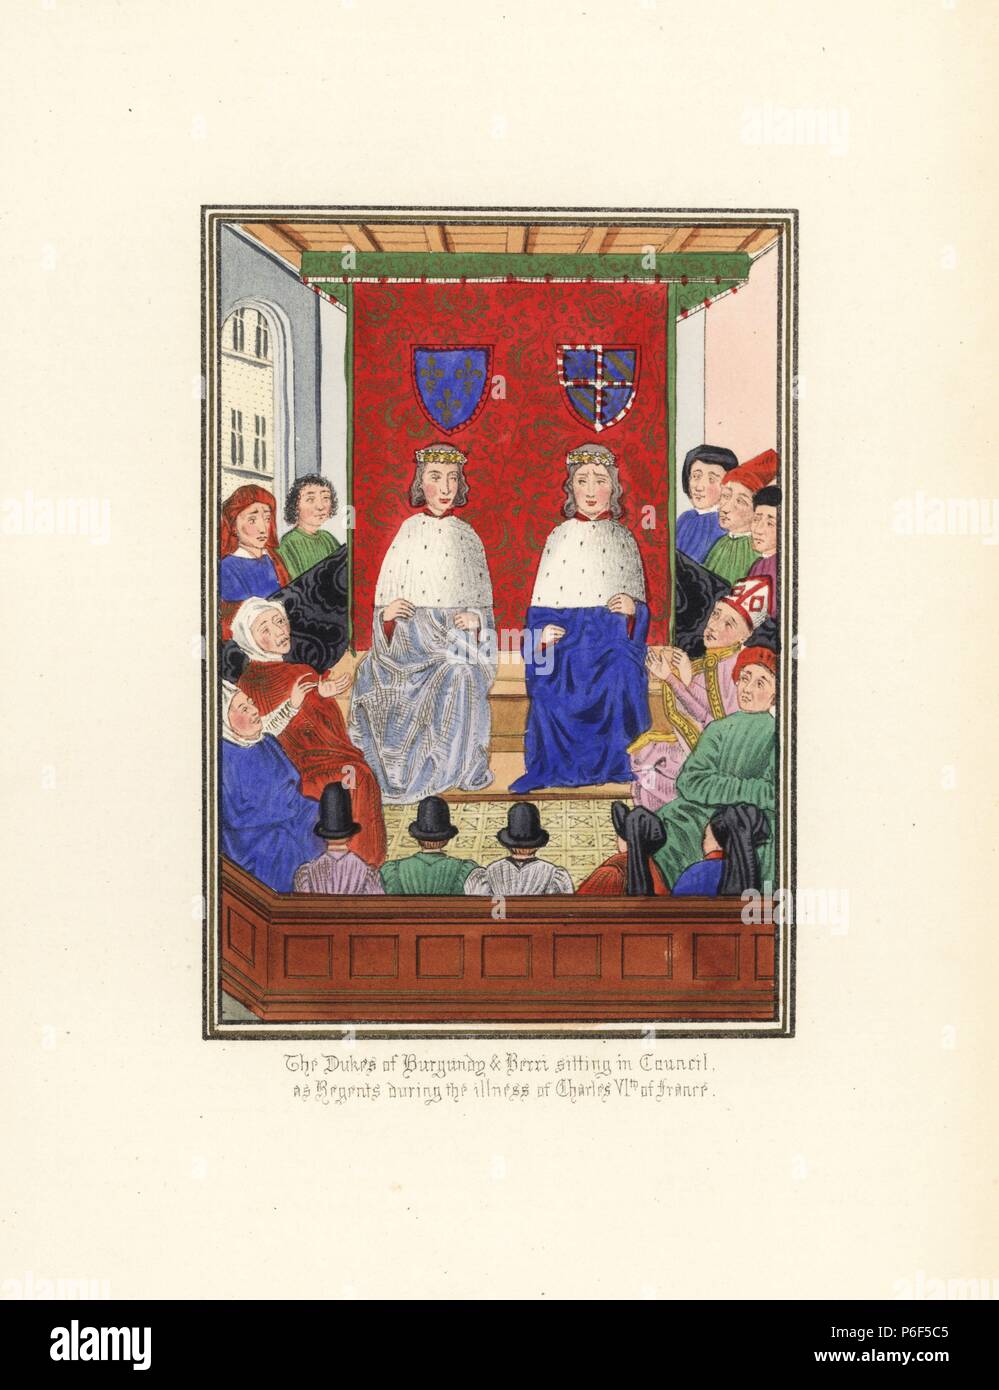 Philip the Bold, Duke of Burgundy, and John, Duke of Berry, sitting in council as Regents during the illness of Charles VI the Mad of France. Handcoloured lithograph after an illuminated manuscript from Sir John Froissart's 'Chronicles of England, France, Spain and the Adjoining Countries, from the Latter Part of the Reign of Edward II to the Coronation of Henry IV,' George Routledge, London, 1868. Stock Photo